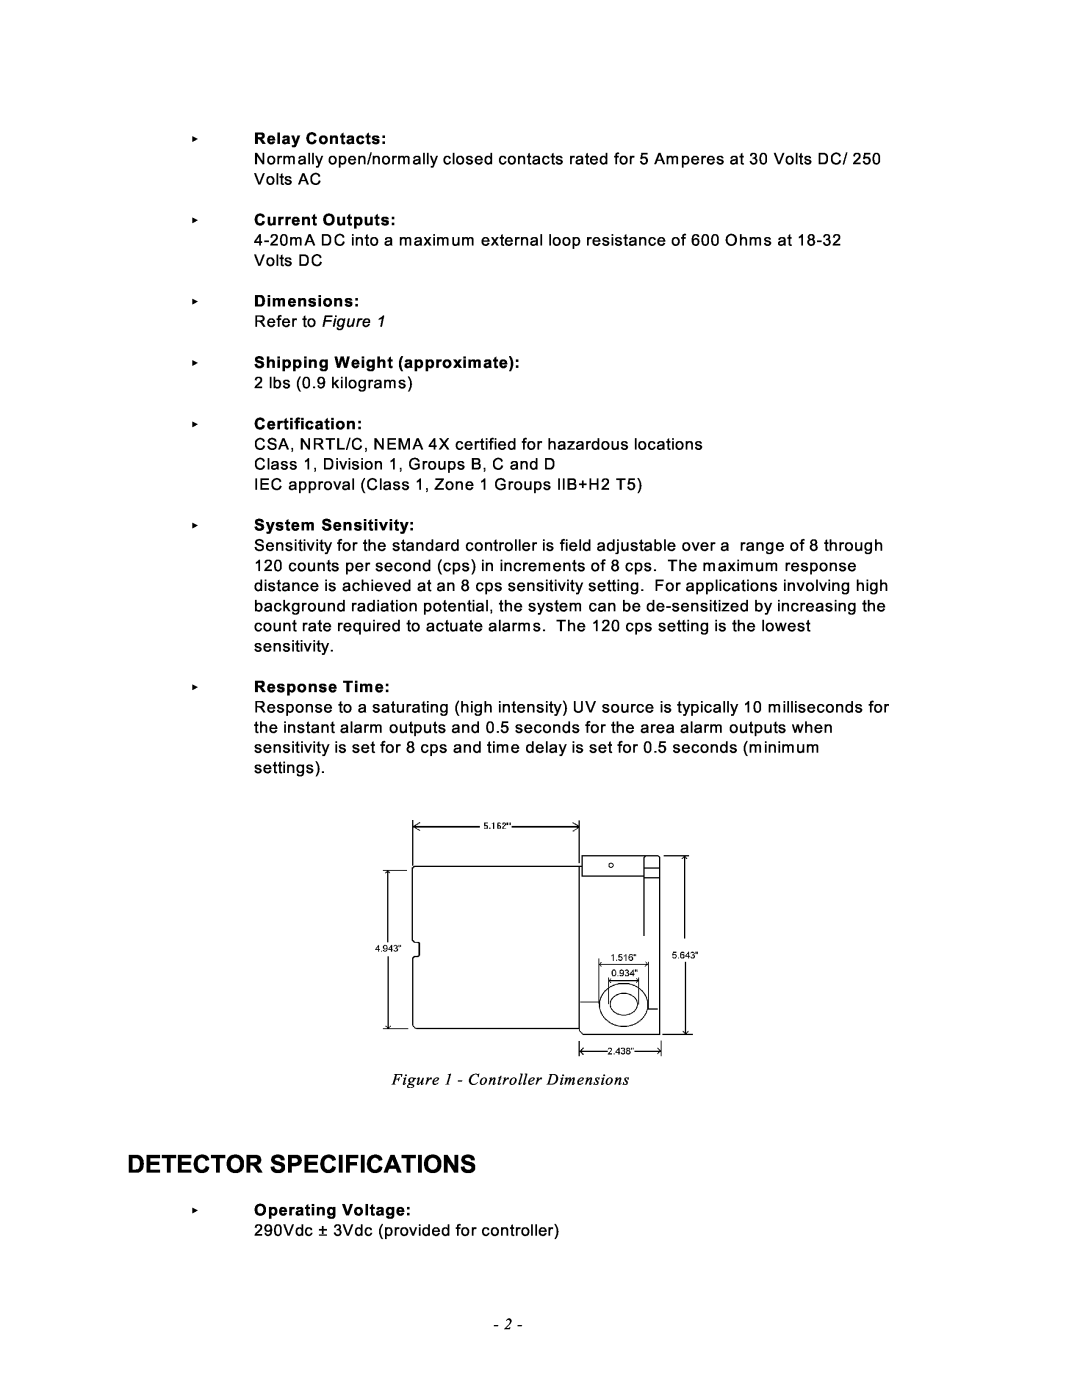 Emerson 0016-00 Detector Specifications, <Relay Contacts, <Current Outputs, <Dimensions: Refer to Figure, <Certification 